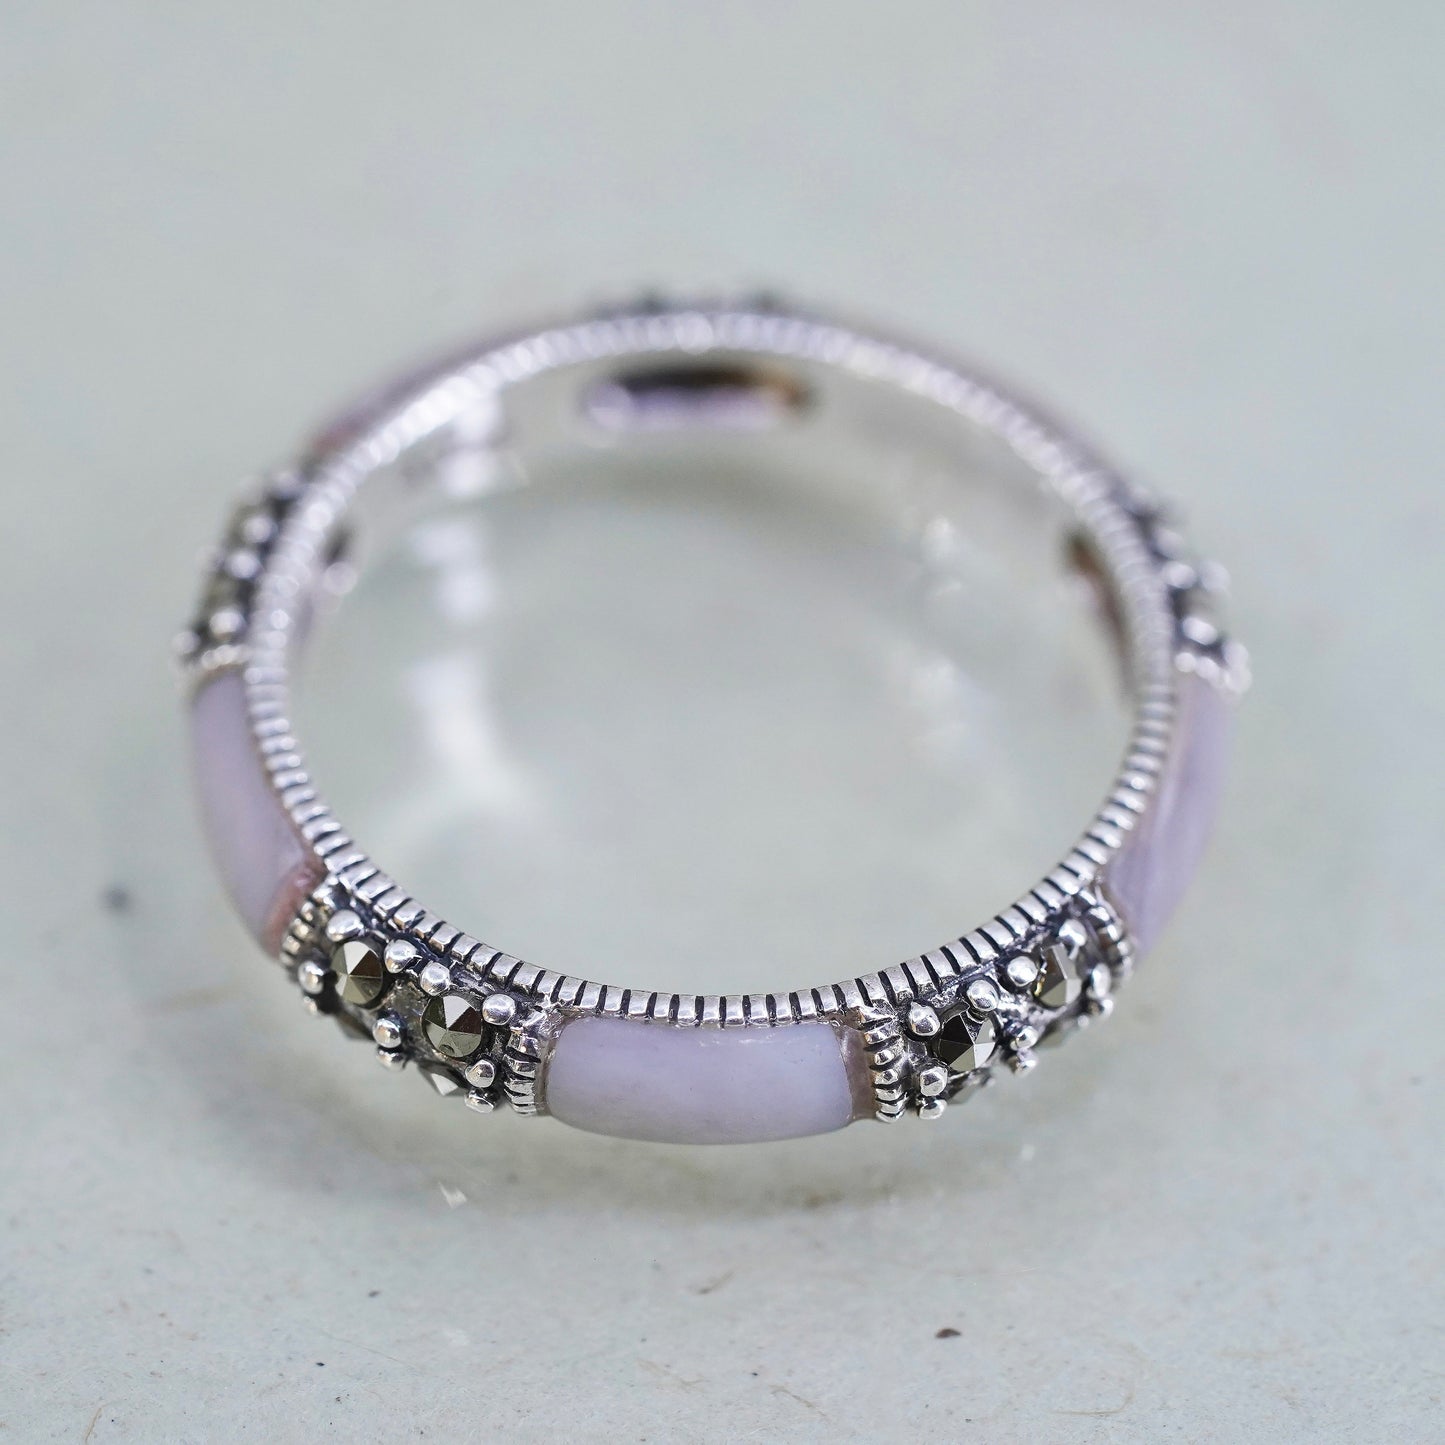 Size 10, vintage sterling silver ring, 925 band with mother of pearl marcasite